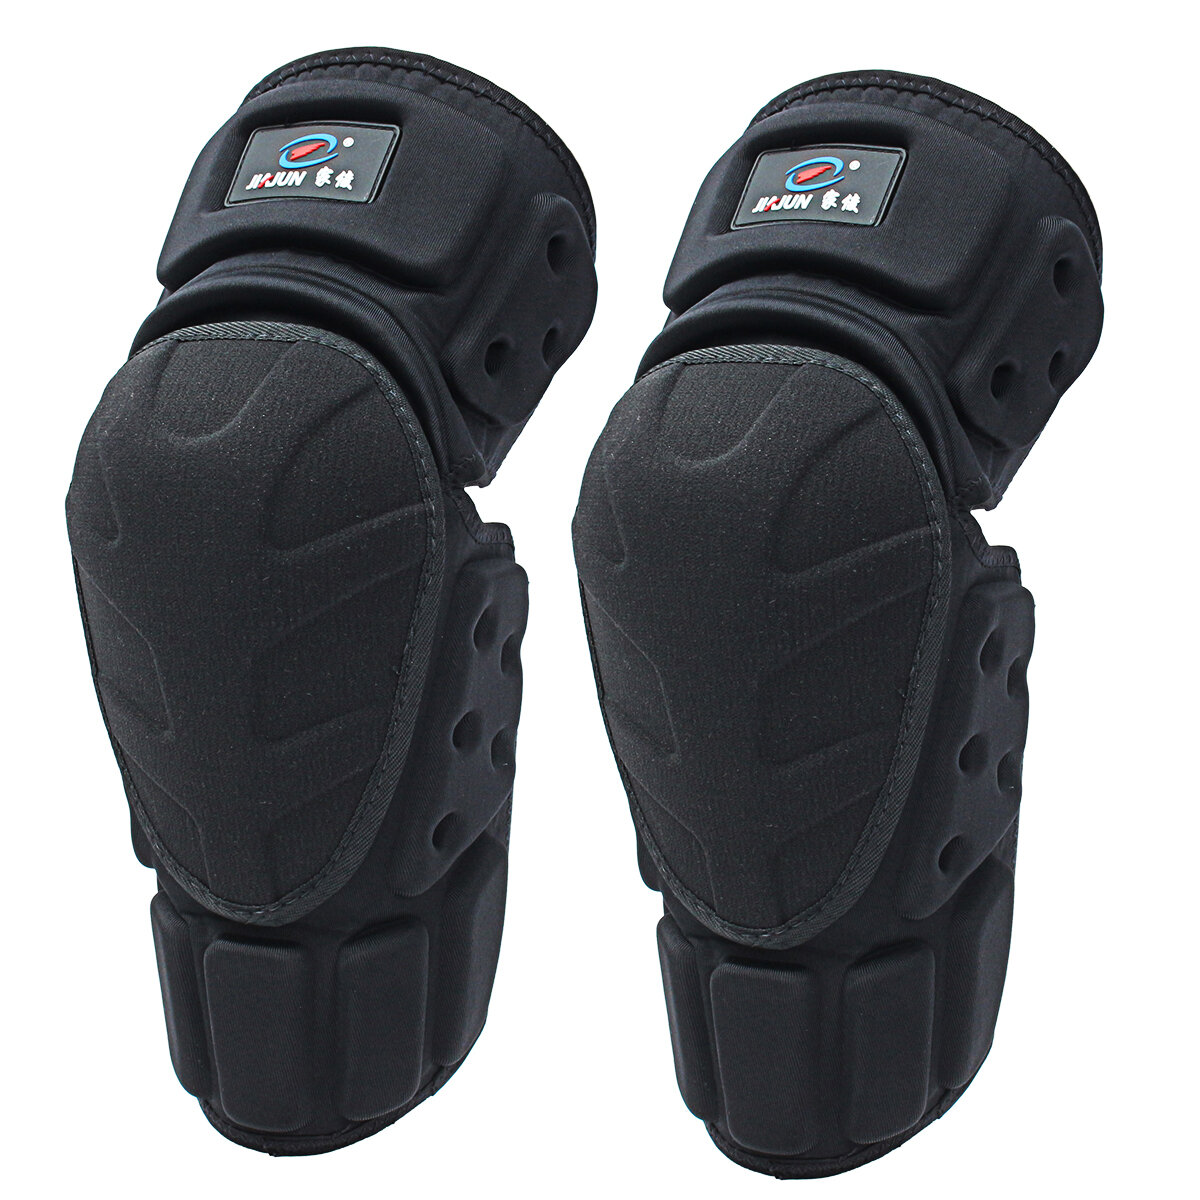 Image of 1 Pair Outdoor Moto Knee Pad Motorcycle Bicycle Black Protector Pads Knee Protective Guards